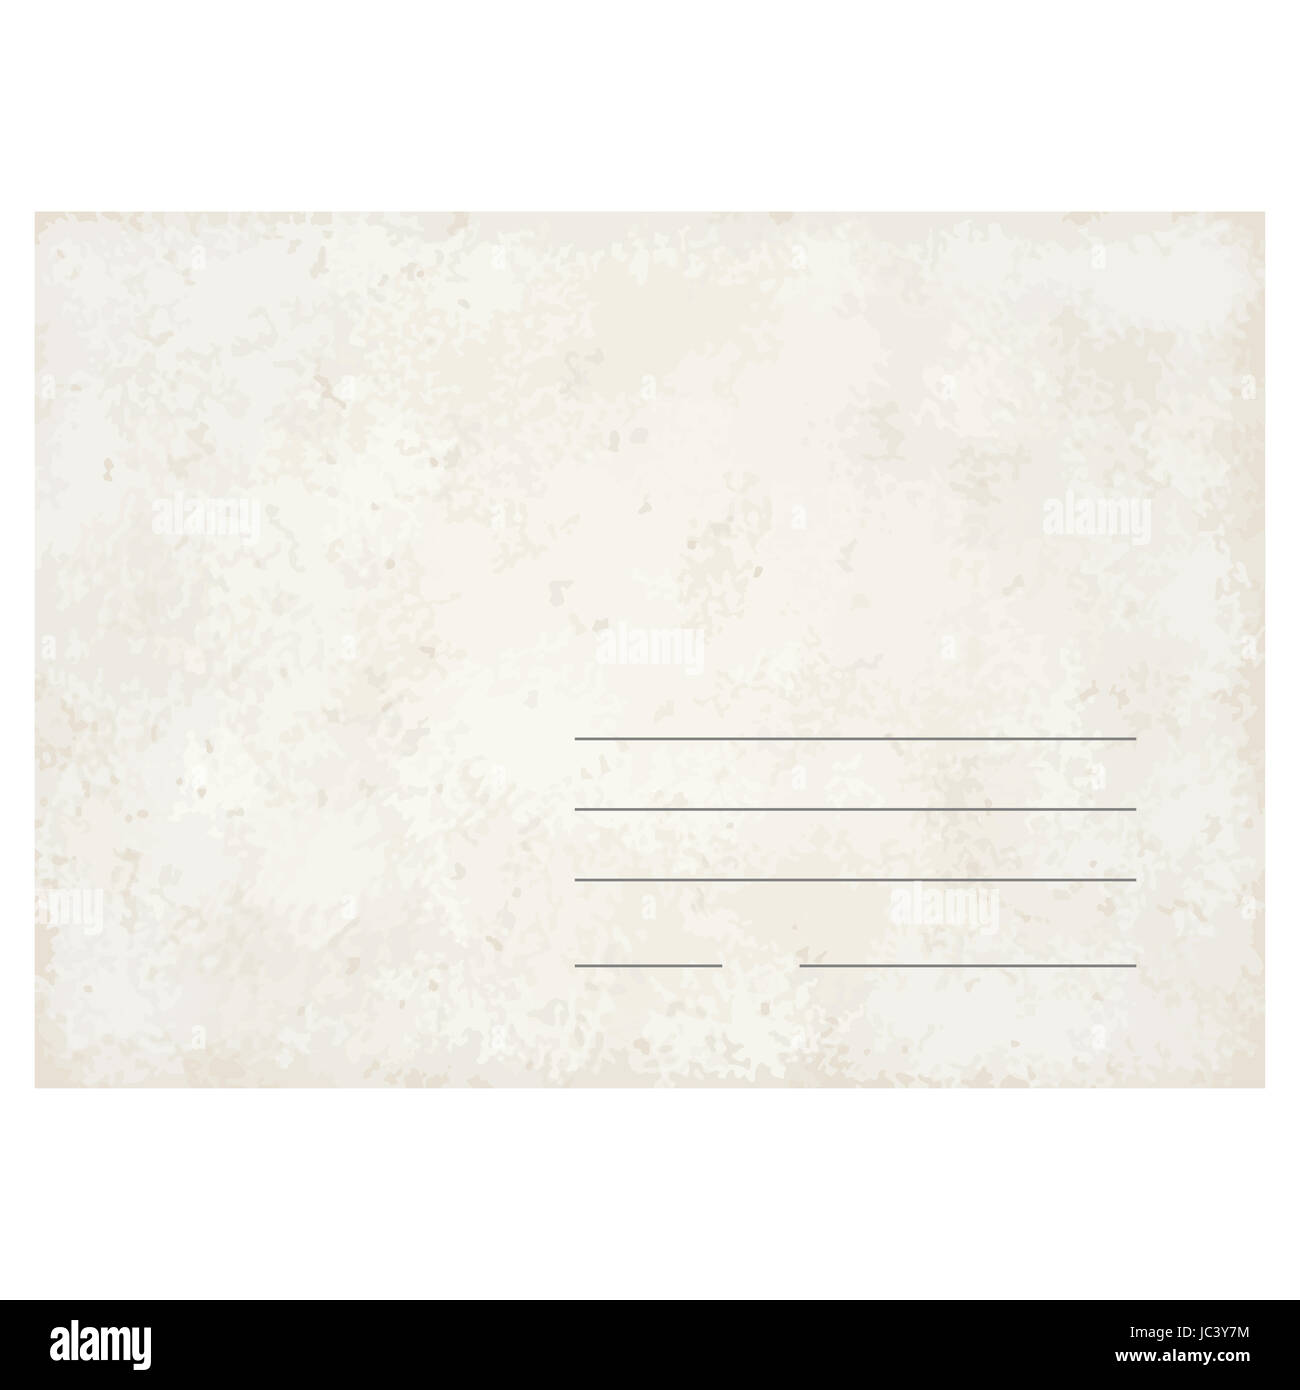 template vector of an old vintage envelope Stock Photo